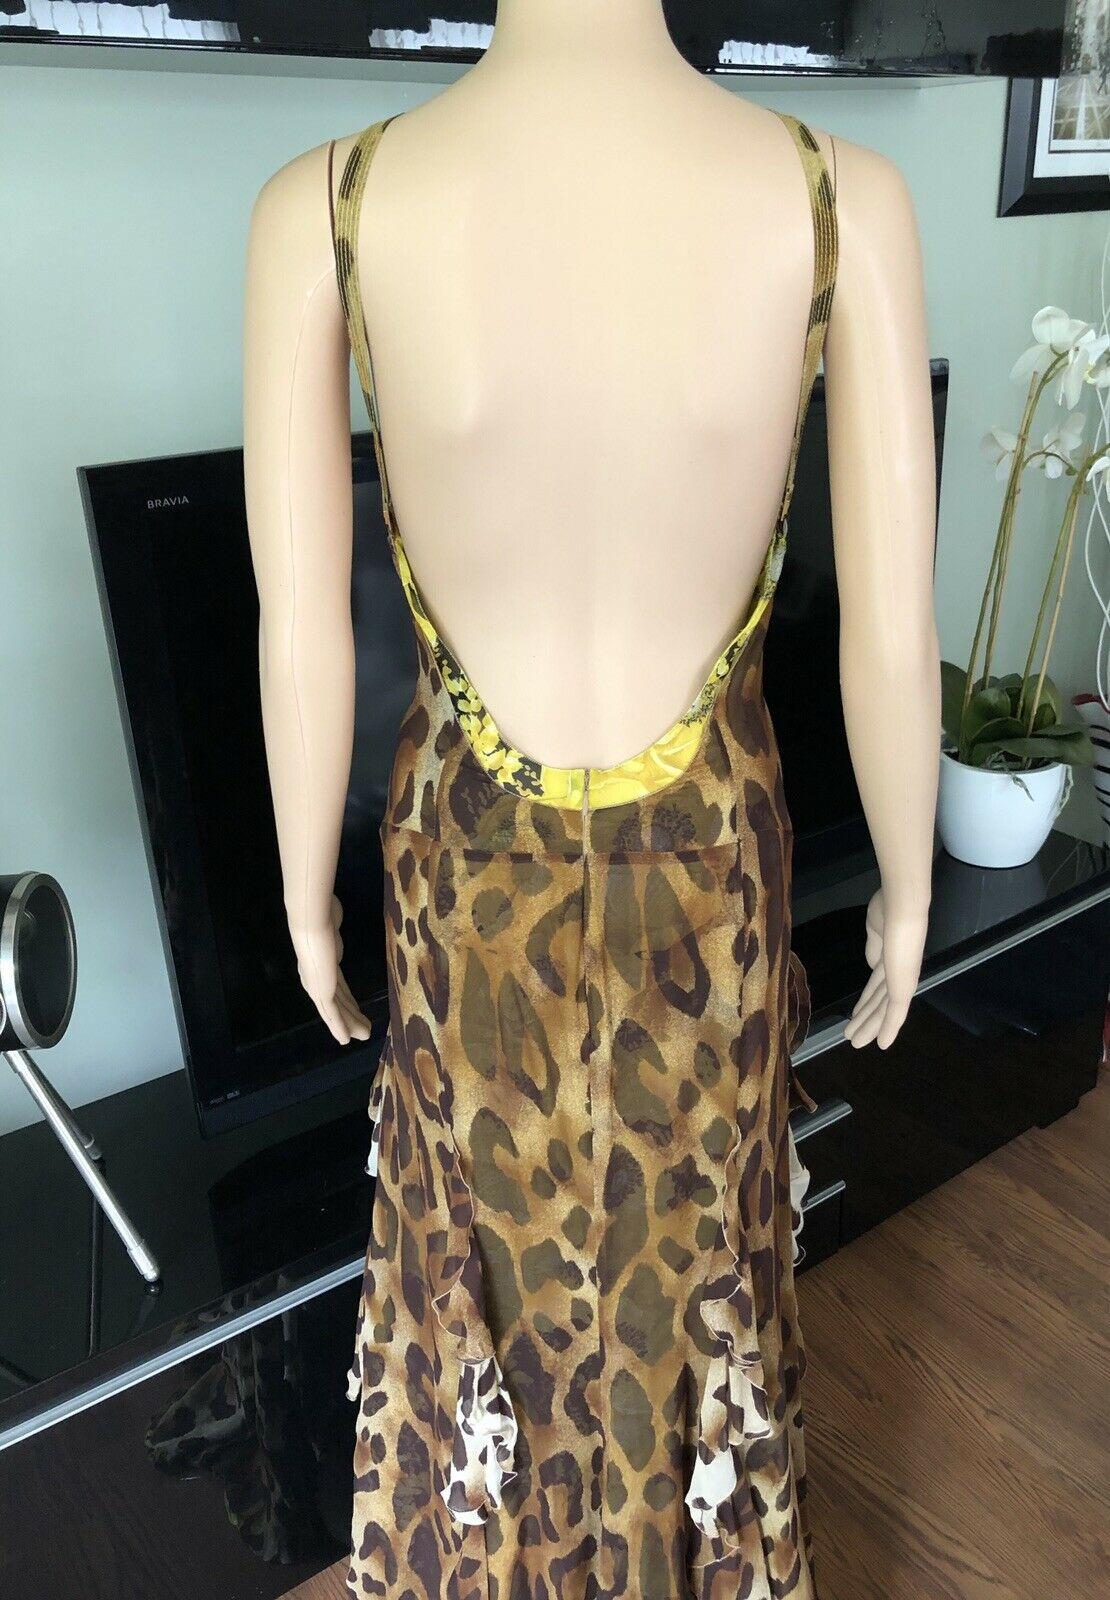 Beige Gianni Versace S/S 2002 Vintage Plunged Backless Dress Gown For Sale